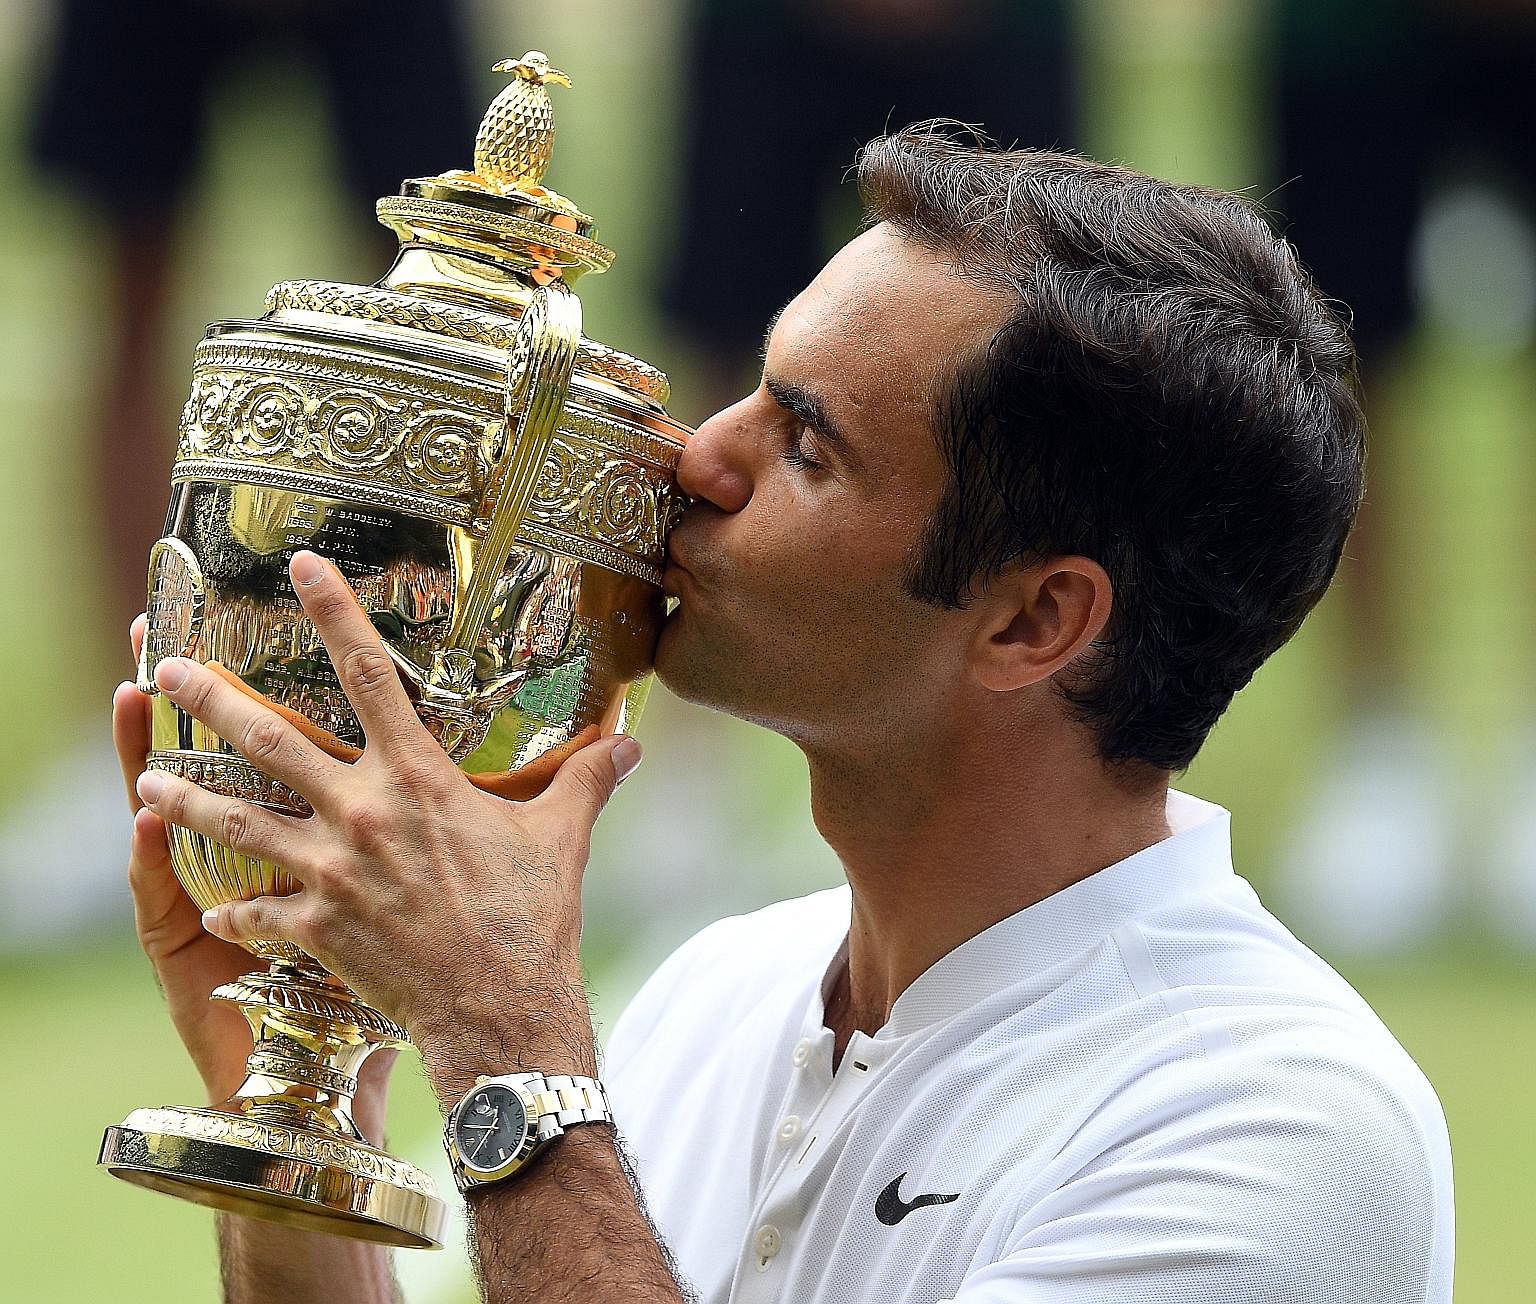 Roger Federer kissing the Wimbledon trophy. With his eighth title at the All England Club, he holds the record for most men's singles crowns alone after sharing it with American Pete Sampras and Briton William Renshaw since 2012.